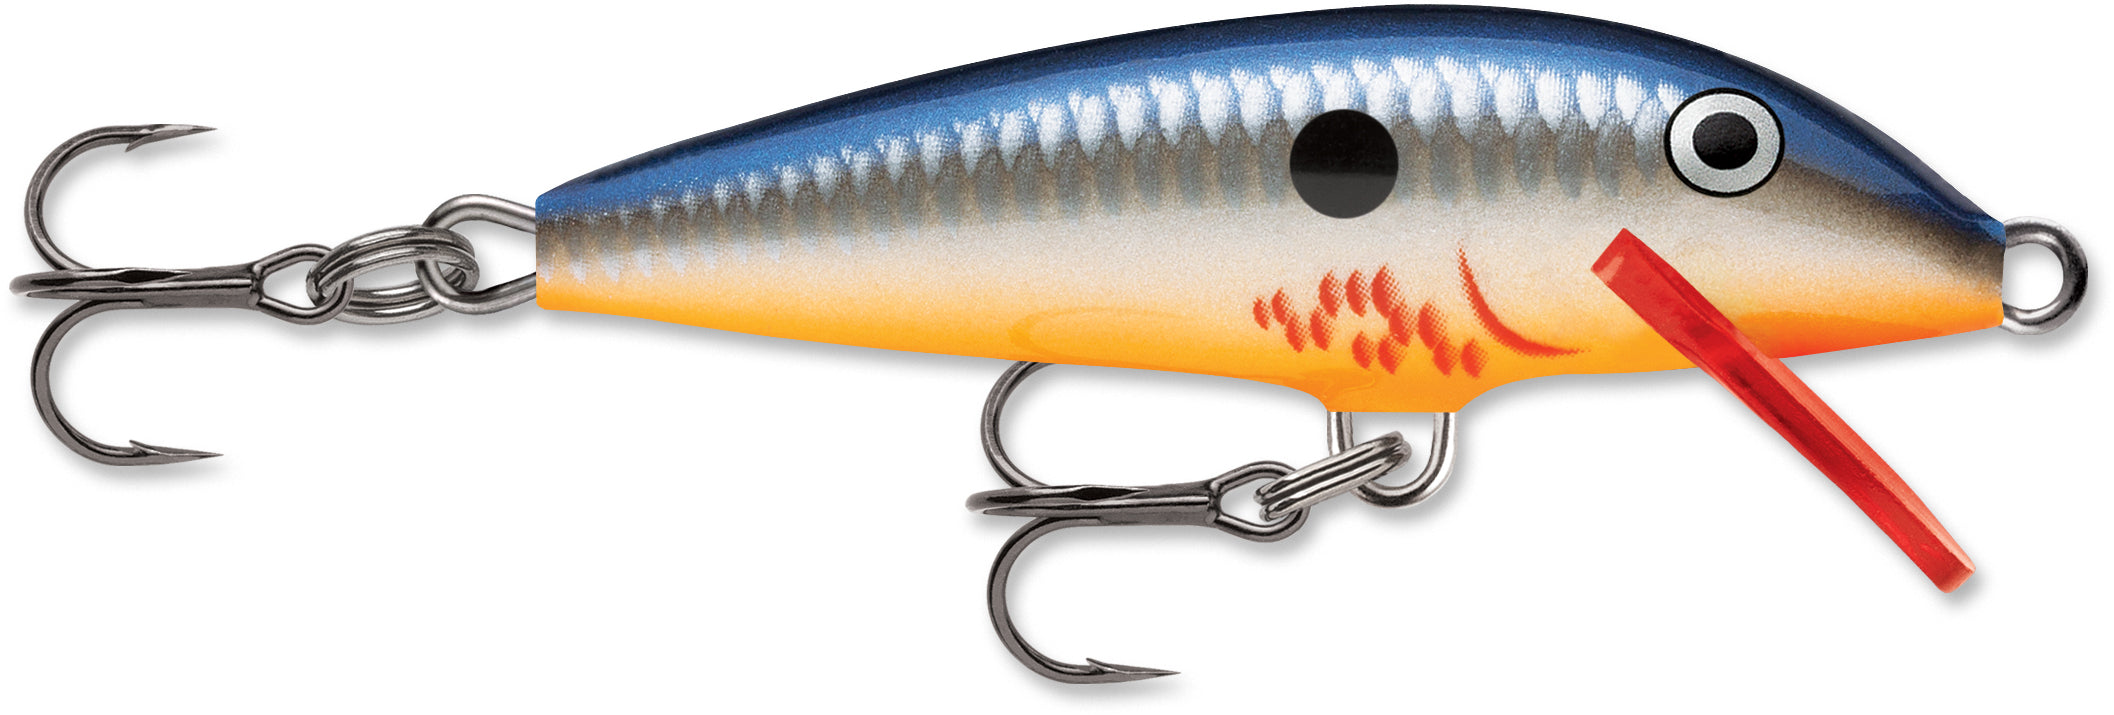 Rapala Original Floating 05 Purpledescent Jagged Tooth Tackle